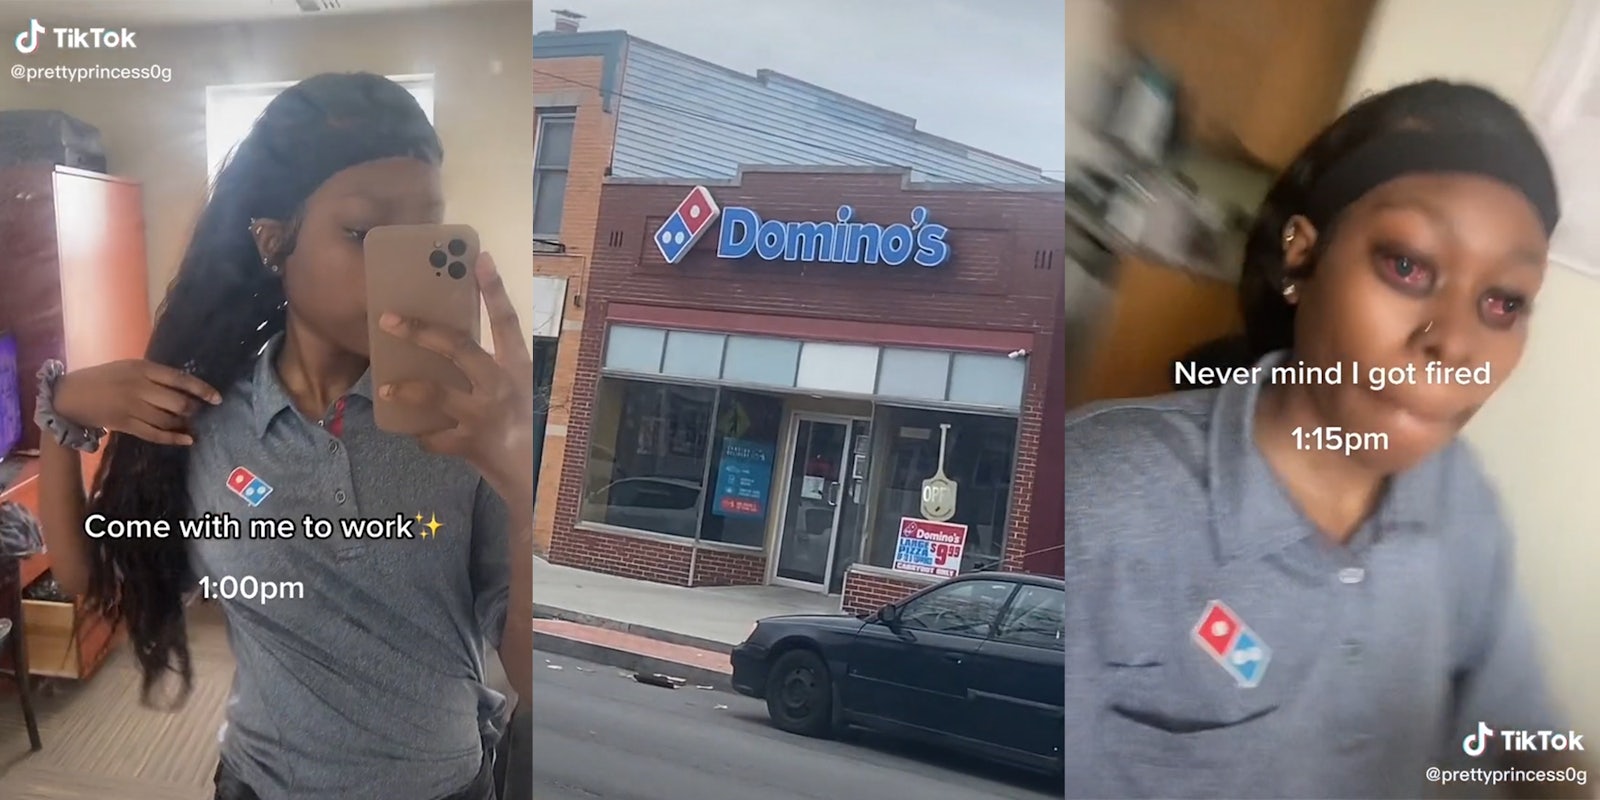 young woman with domino's shirt and caption 'Come with me to work 1:00pm' (l) Domino's storefront (c) same young woman with red eyes and caption 'Never mind I got fired 1:15pm'